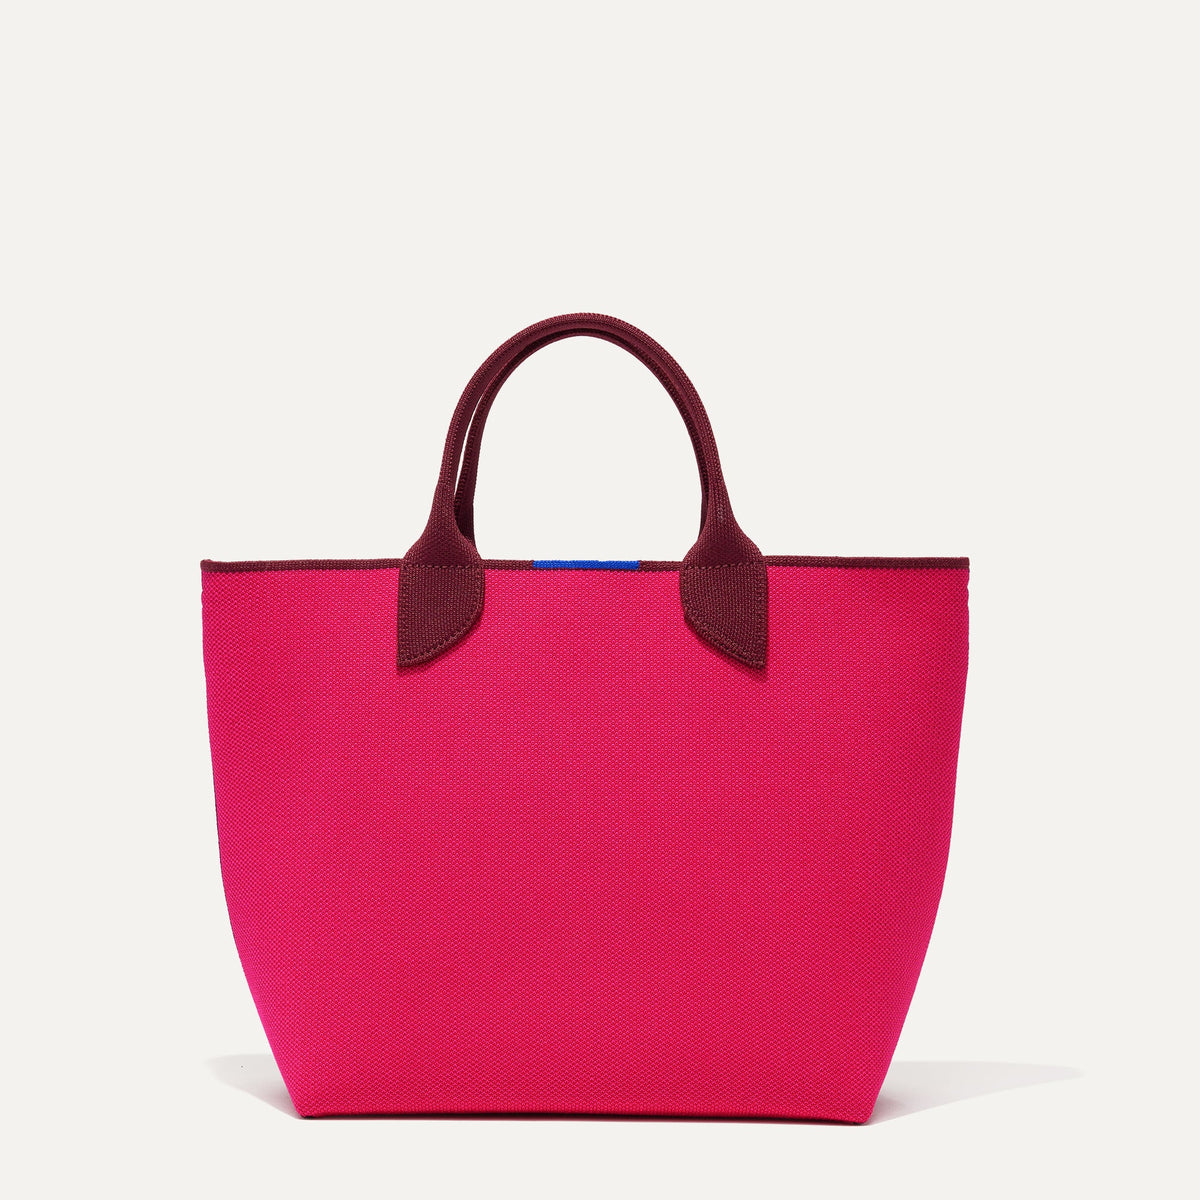 Requested Items Edition - What Fits Inside the Longchamp Pouch with Handle:  A Versatile Accessory 